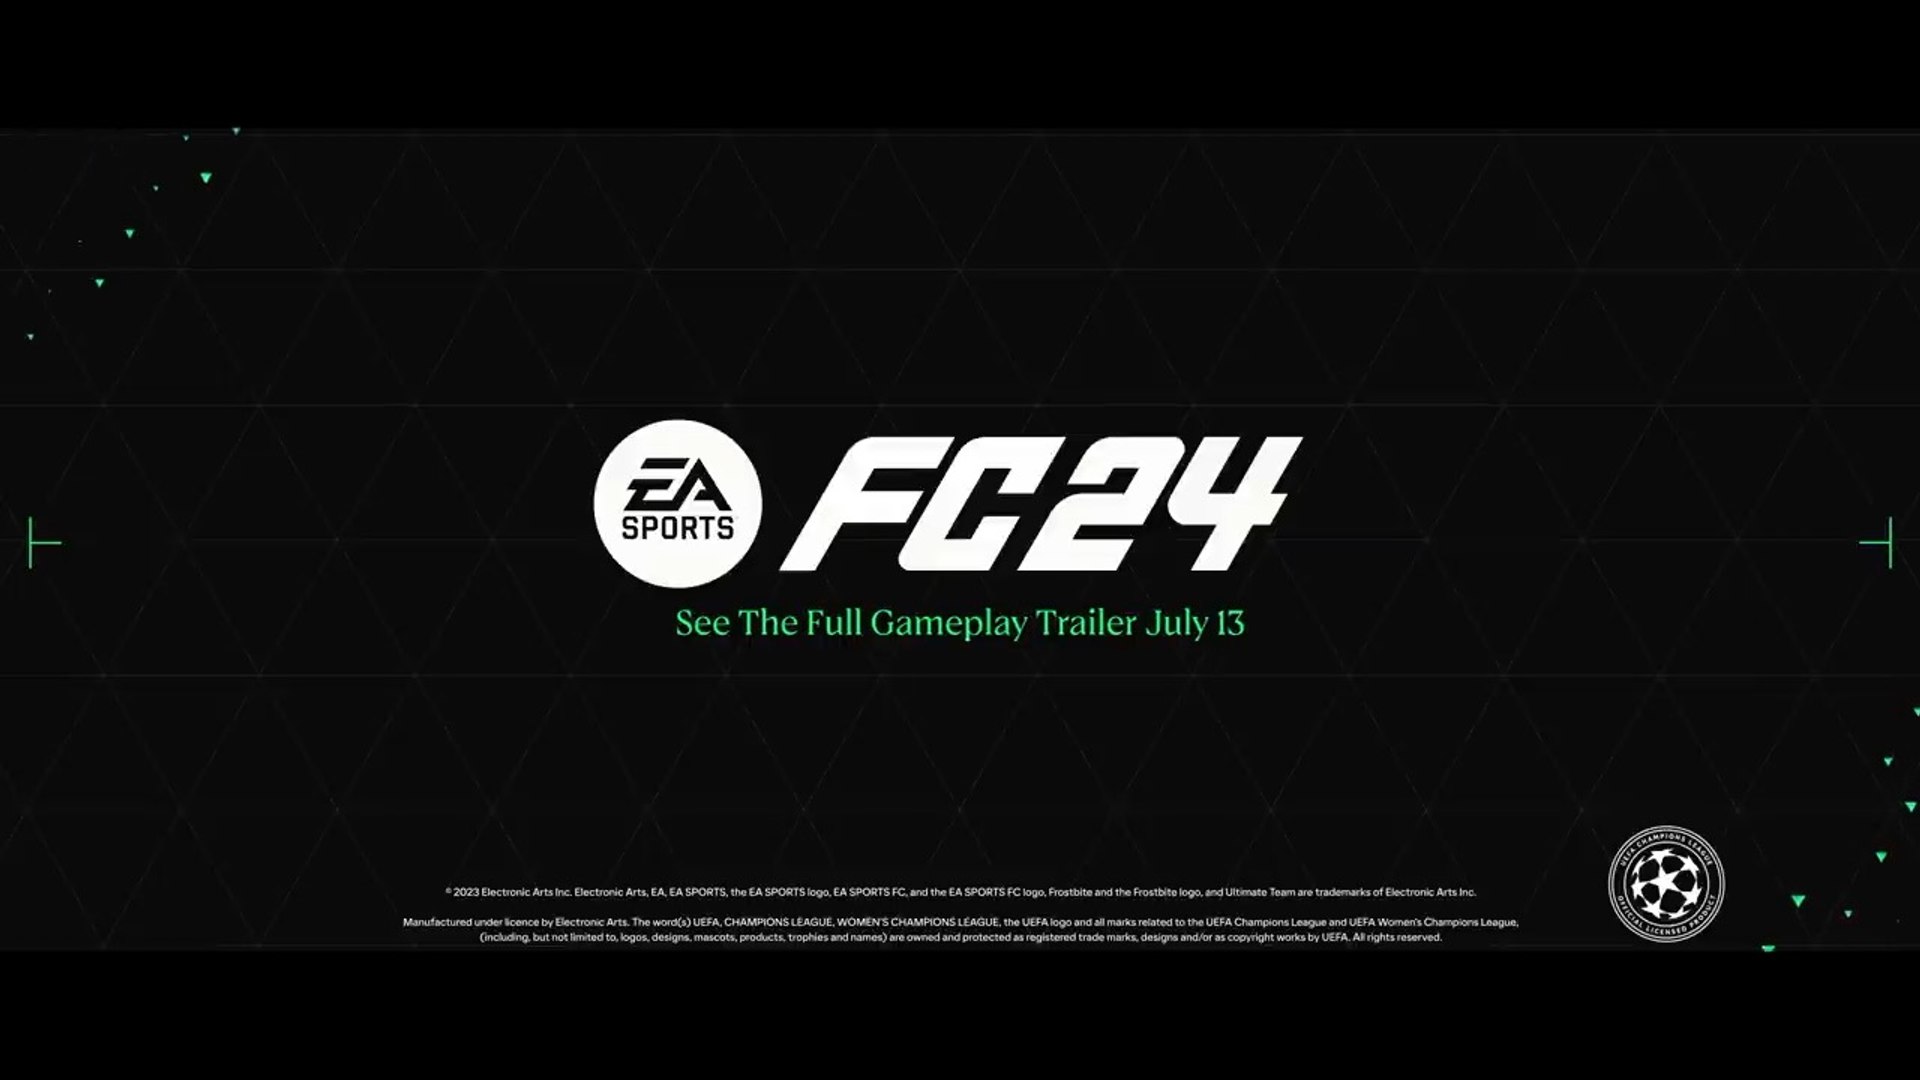 FC 24 - Official Gameplay Trailer